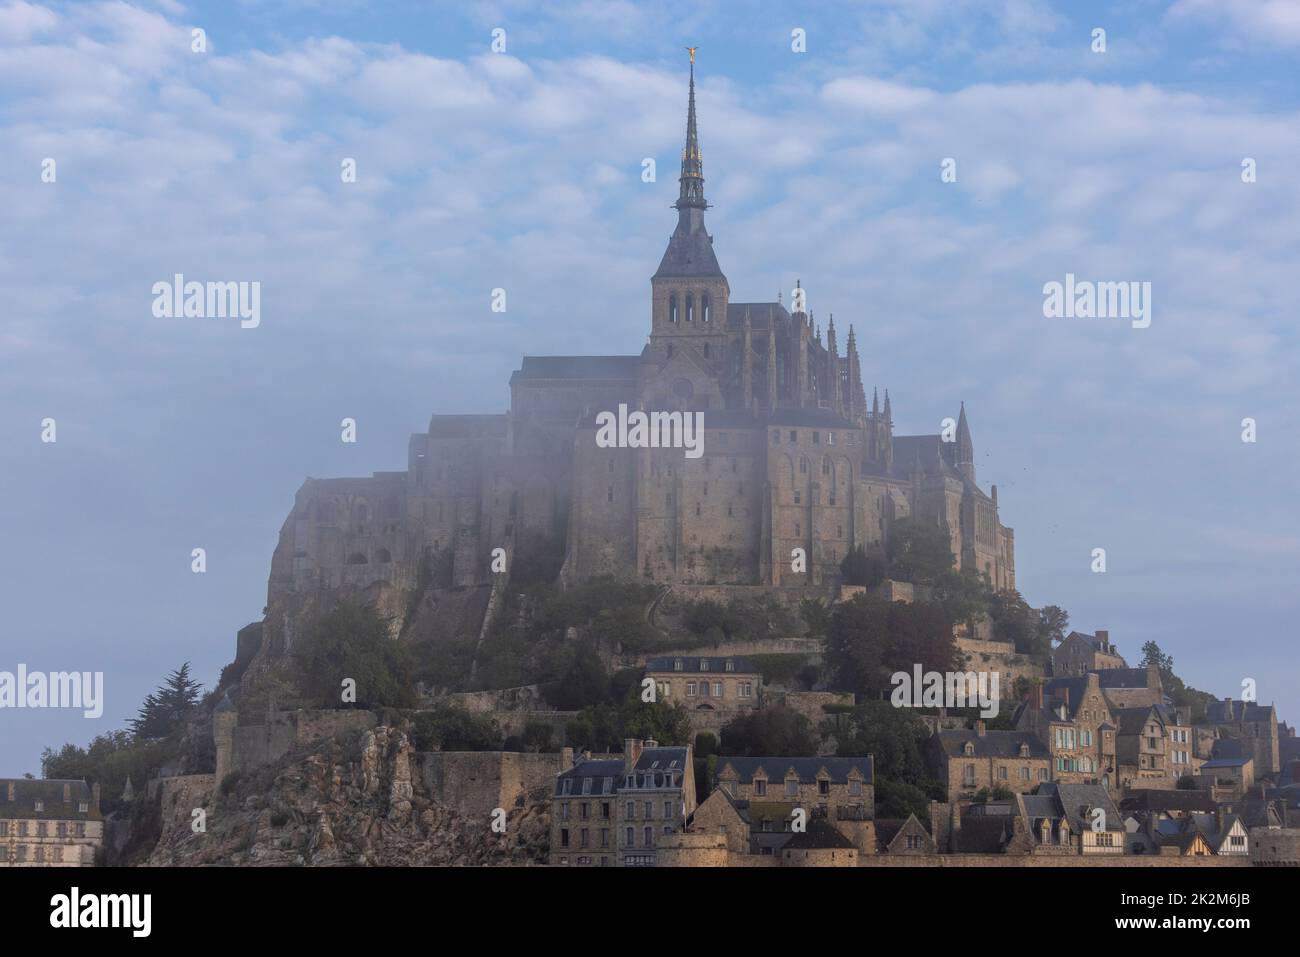 Foggy view of Le Mont Saint-Michel (Saint Michael's Mount), a small, rocky tidal island, famous for its medieval abbey, Avranches, Normandy, France. Stock Photo